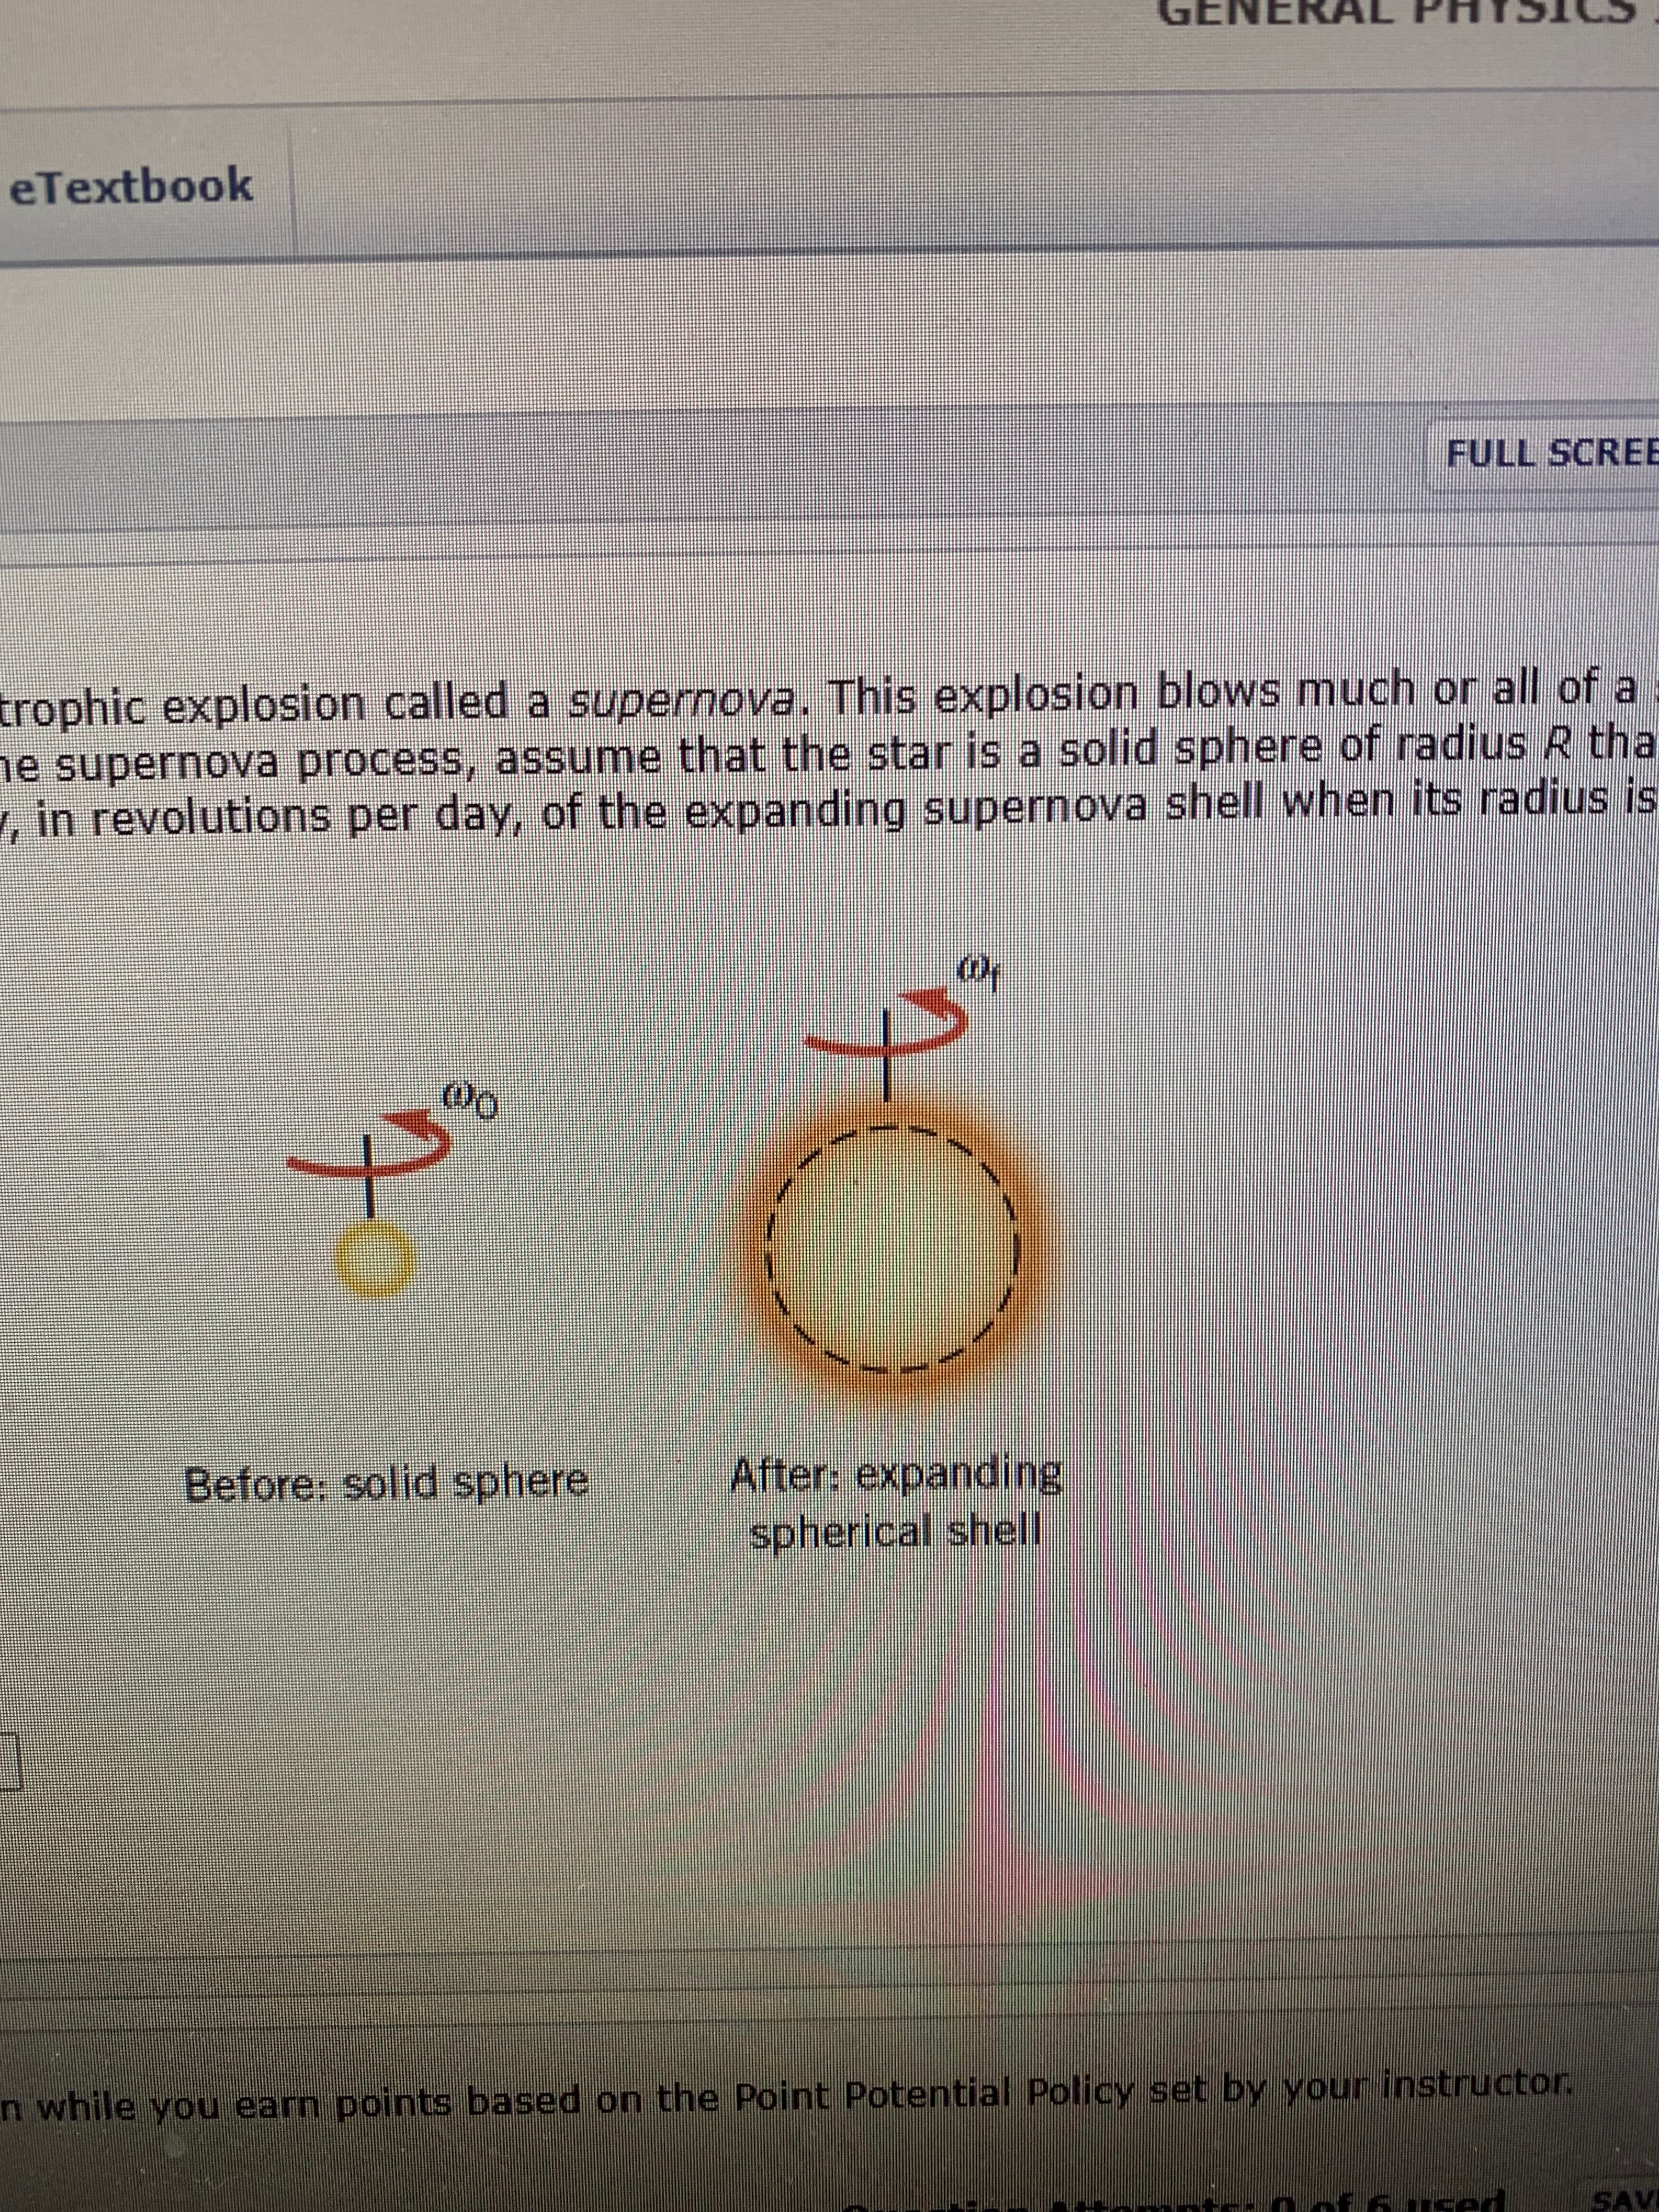 GENE
eTextbook
FULL SCRE
trophic explosion called a supernova. This explosion blows much or all of a
e supernova process, assume that the star is a solid sphere of radius R tha
, in revolutions per day, of the expanding supernova shell when its radius is
Oo
After: expanding
spherical shell
Before: solid sphere
n while you earn points based on the Point Potential Policy set by your instructor
SAVI
used
